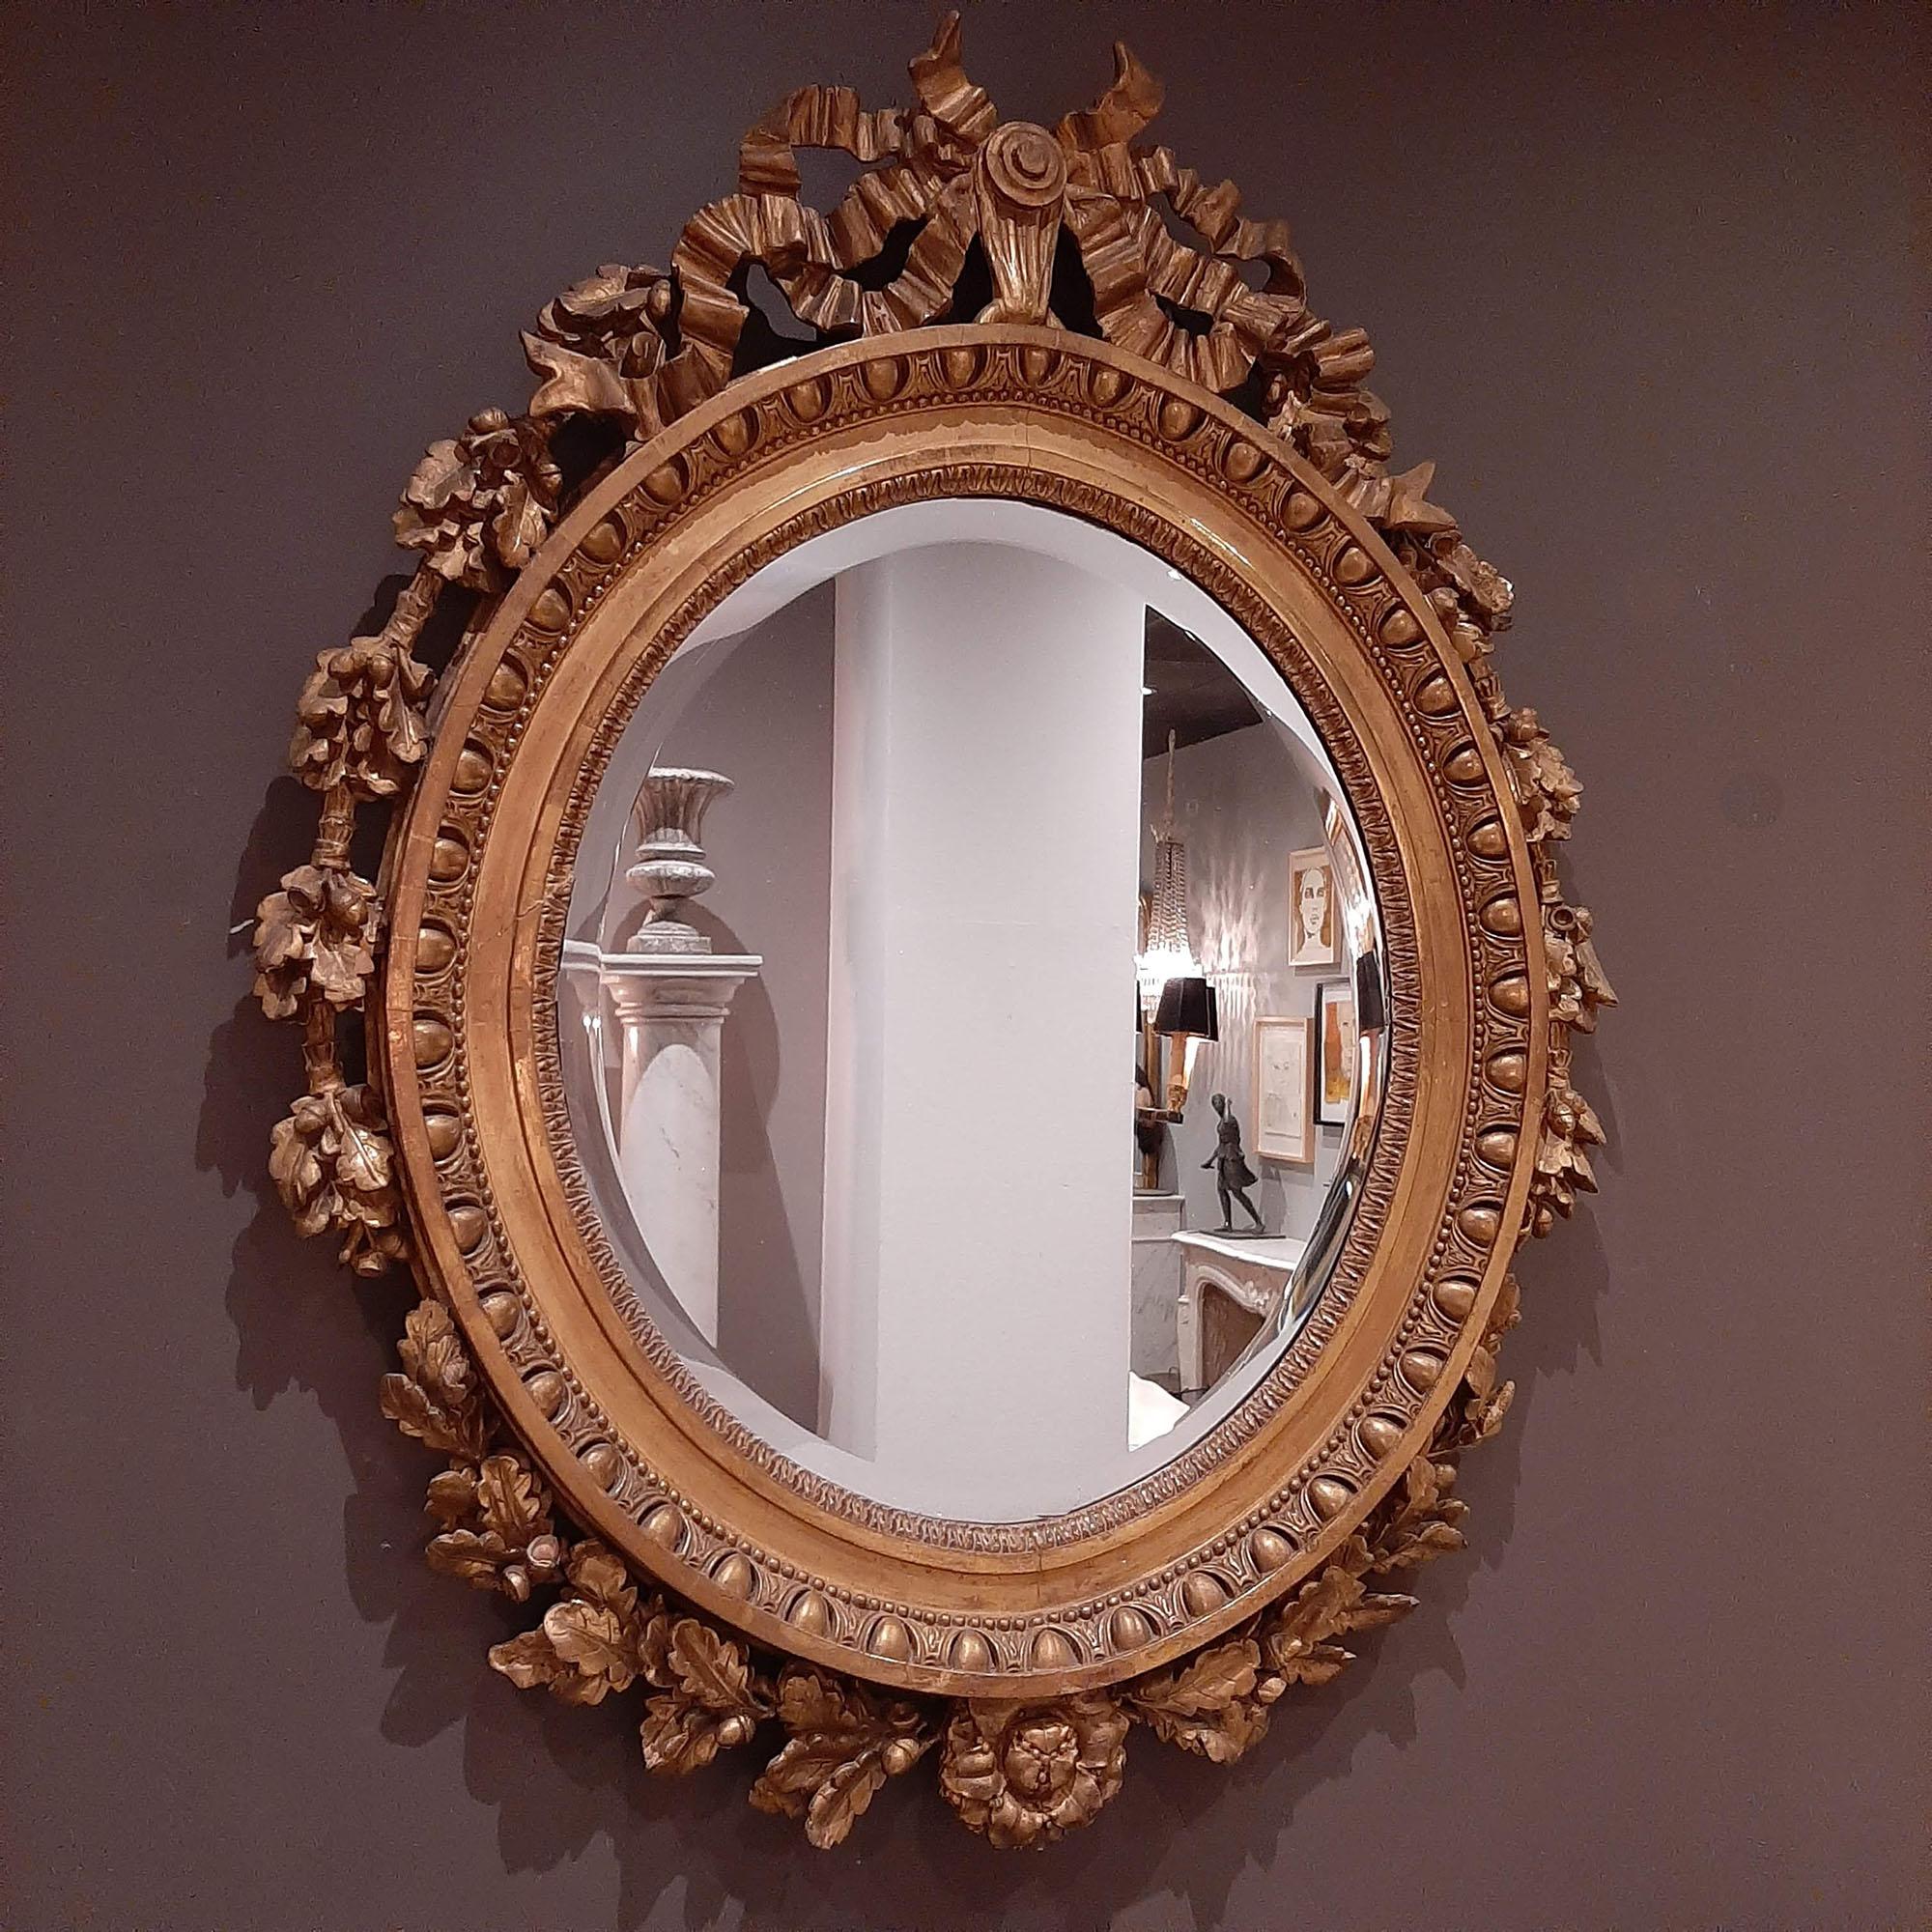 Antique 19th century gilt, oval girandole mirror in the style of Louis XVI. Beautifully carved gilded frame with a facet cut mirror.